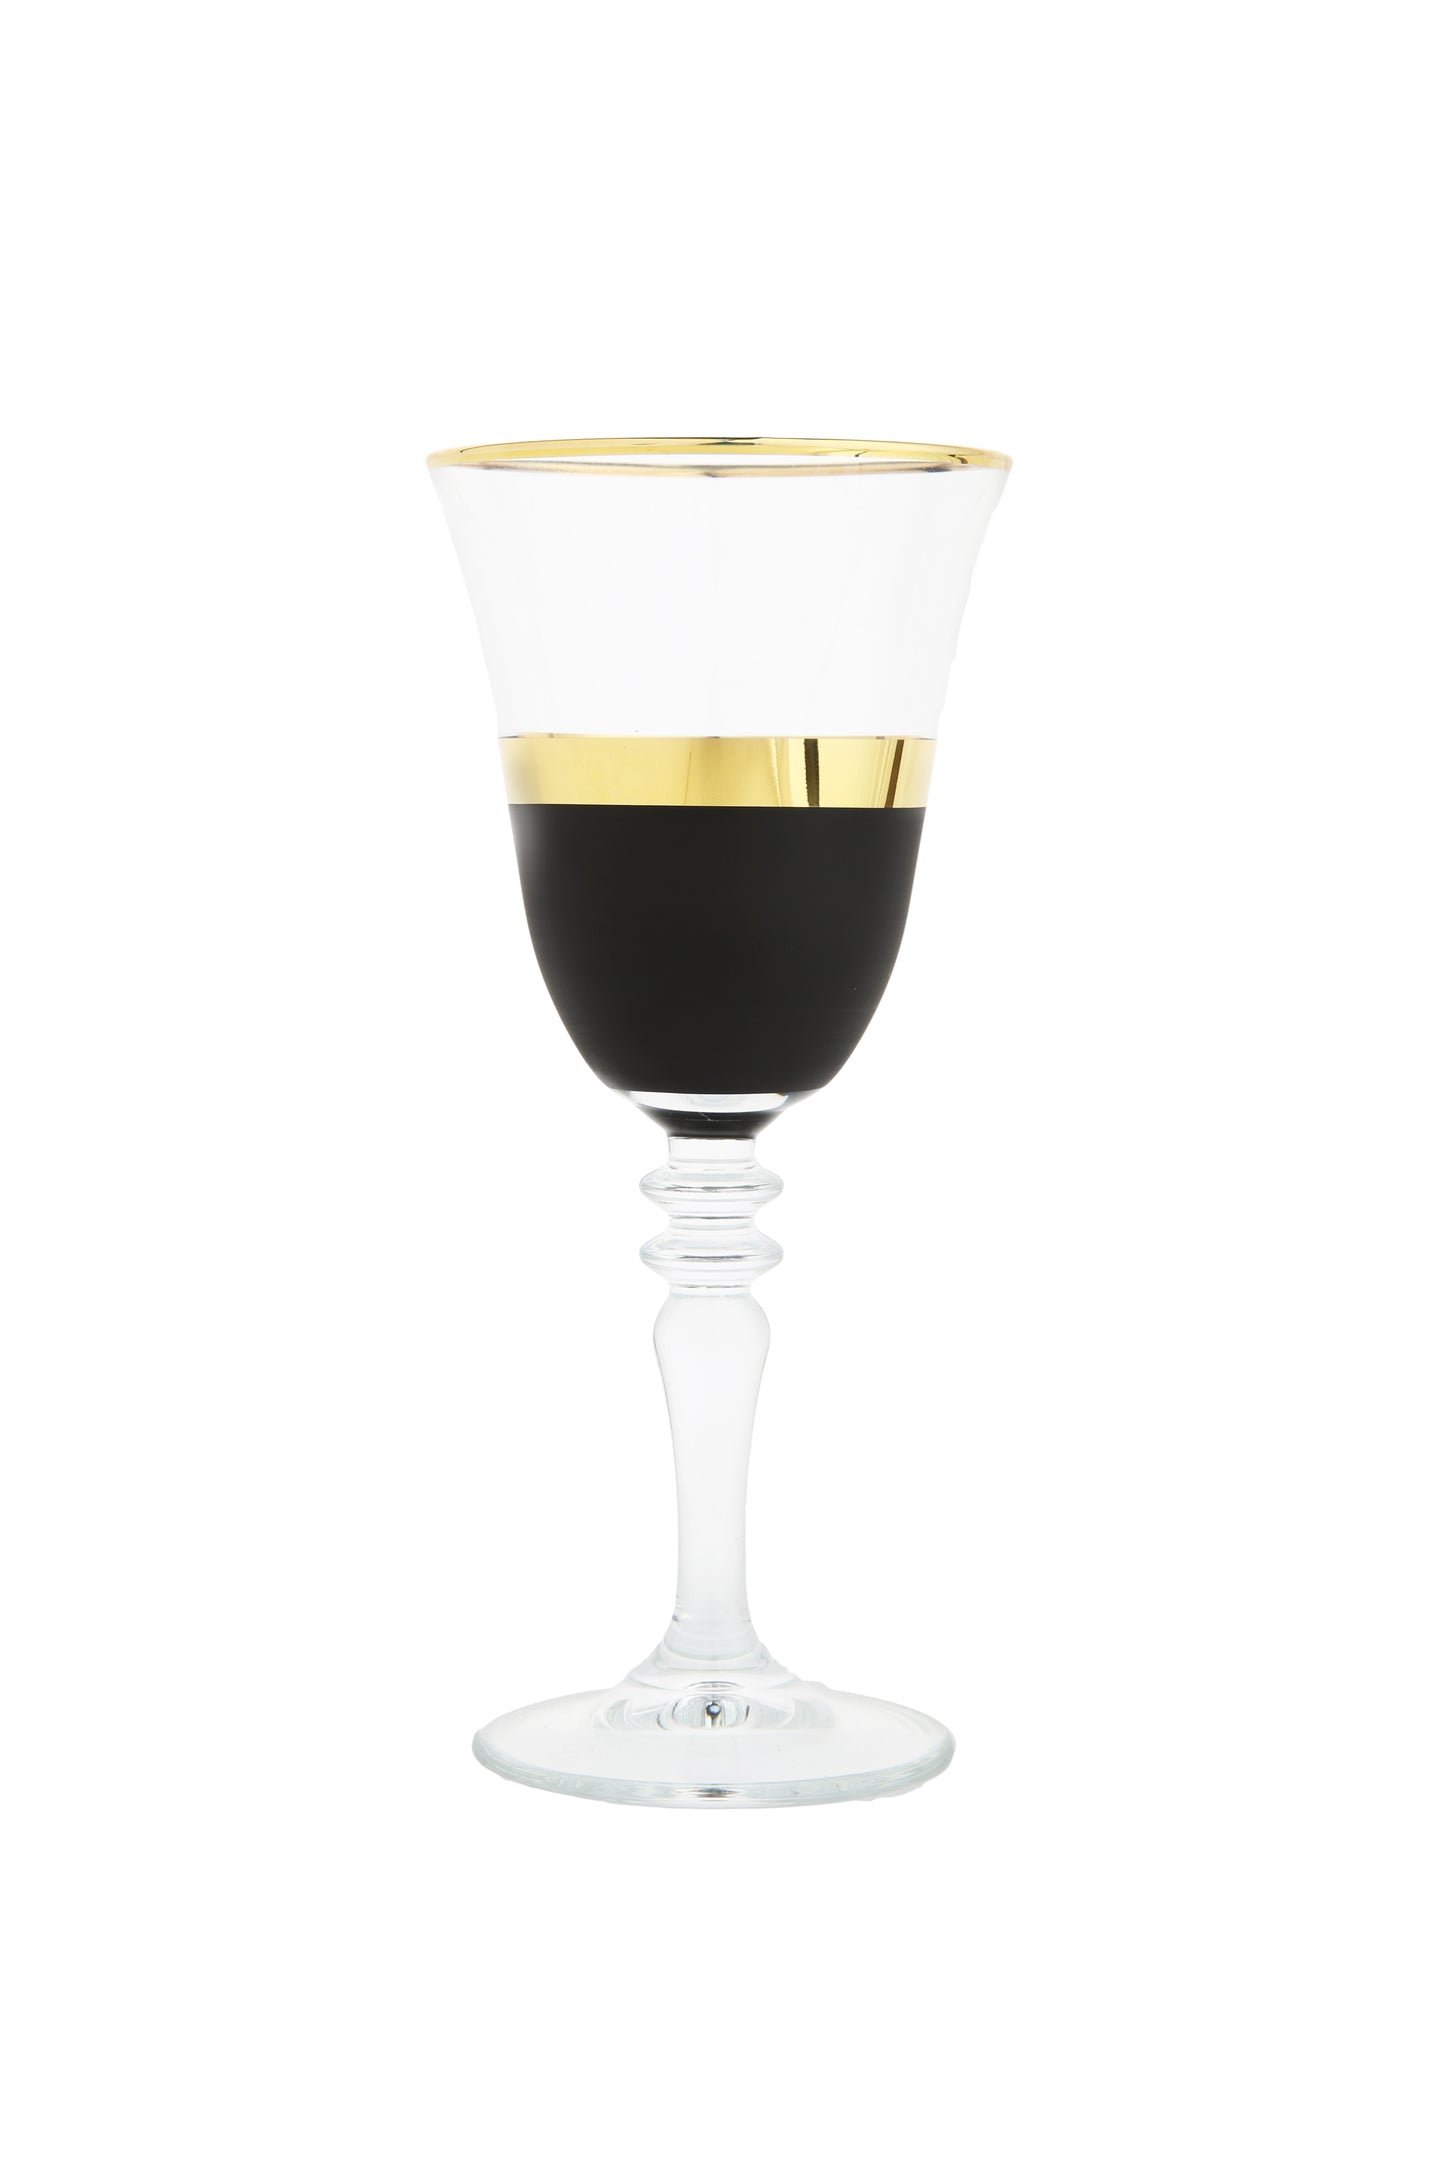 Set of 6 Water Glasses with Black and Gold Design